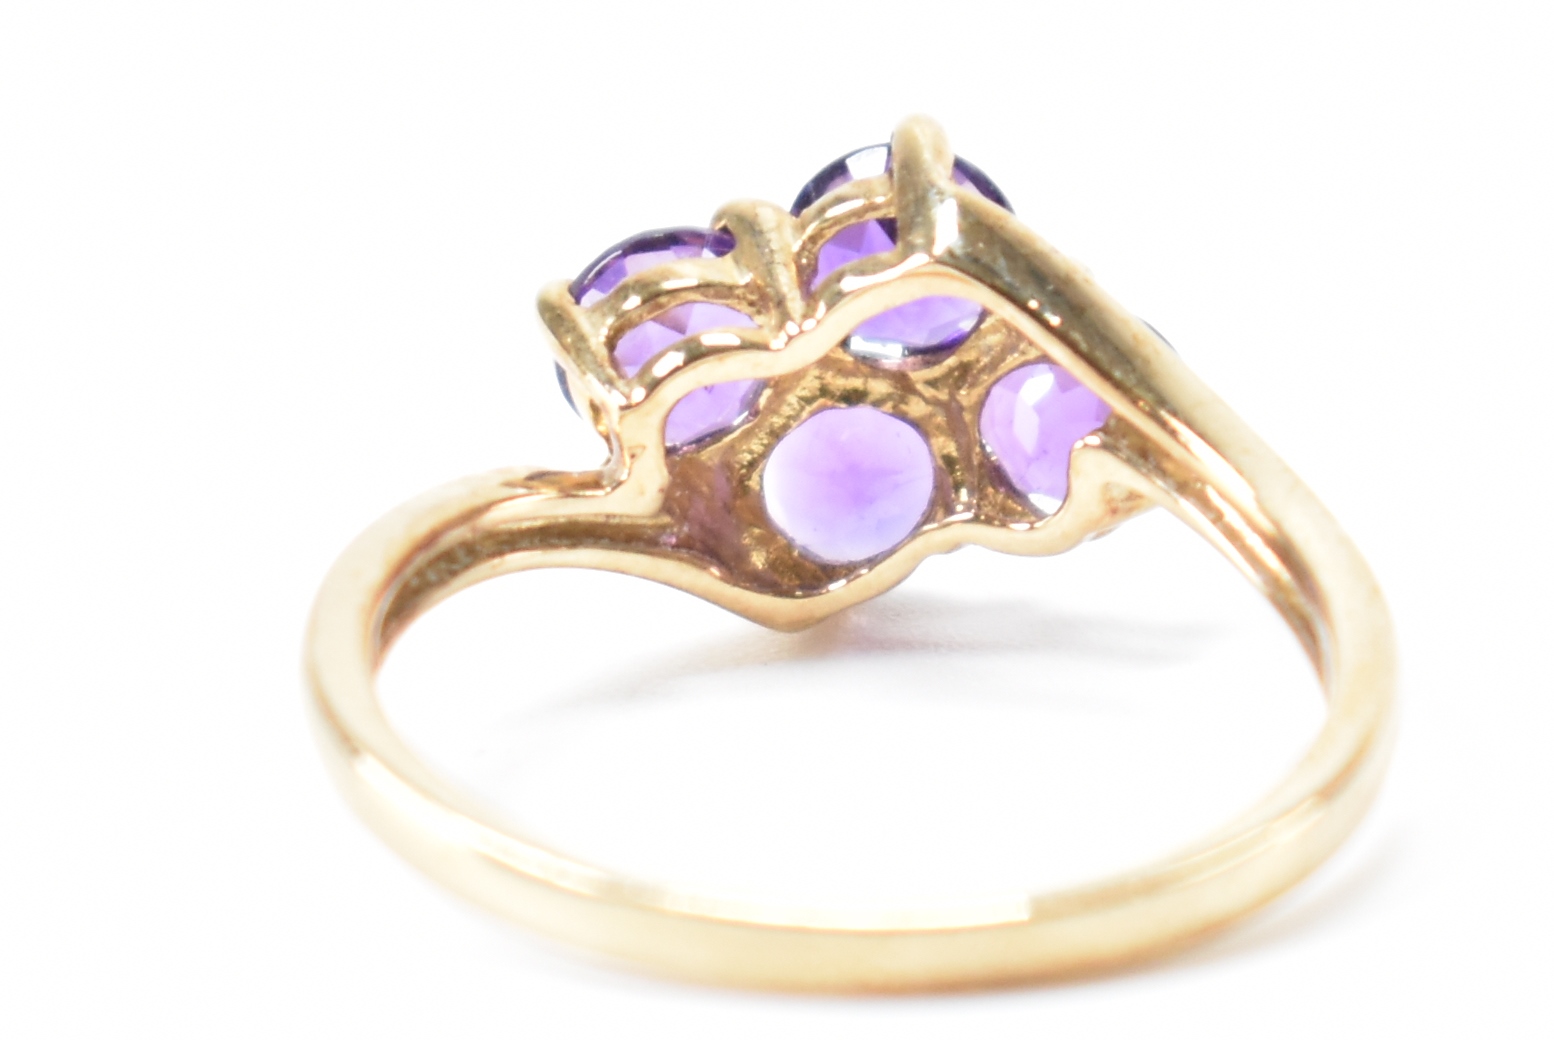 HALLMARKED 9CT GOLD & PURPLE STONE CROSSOVER RING - Image 3 of 8